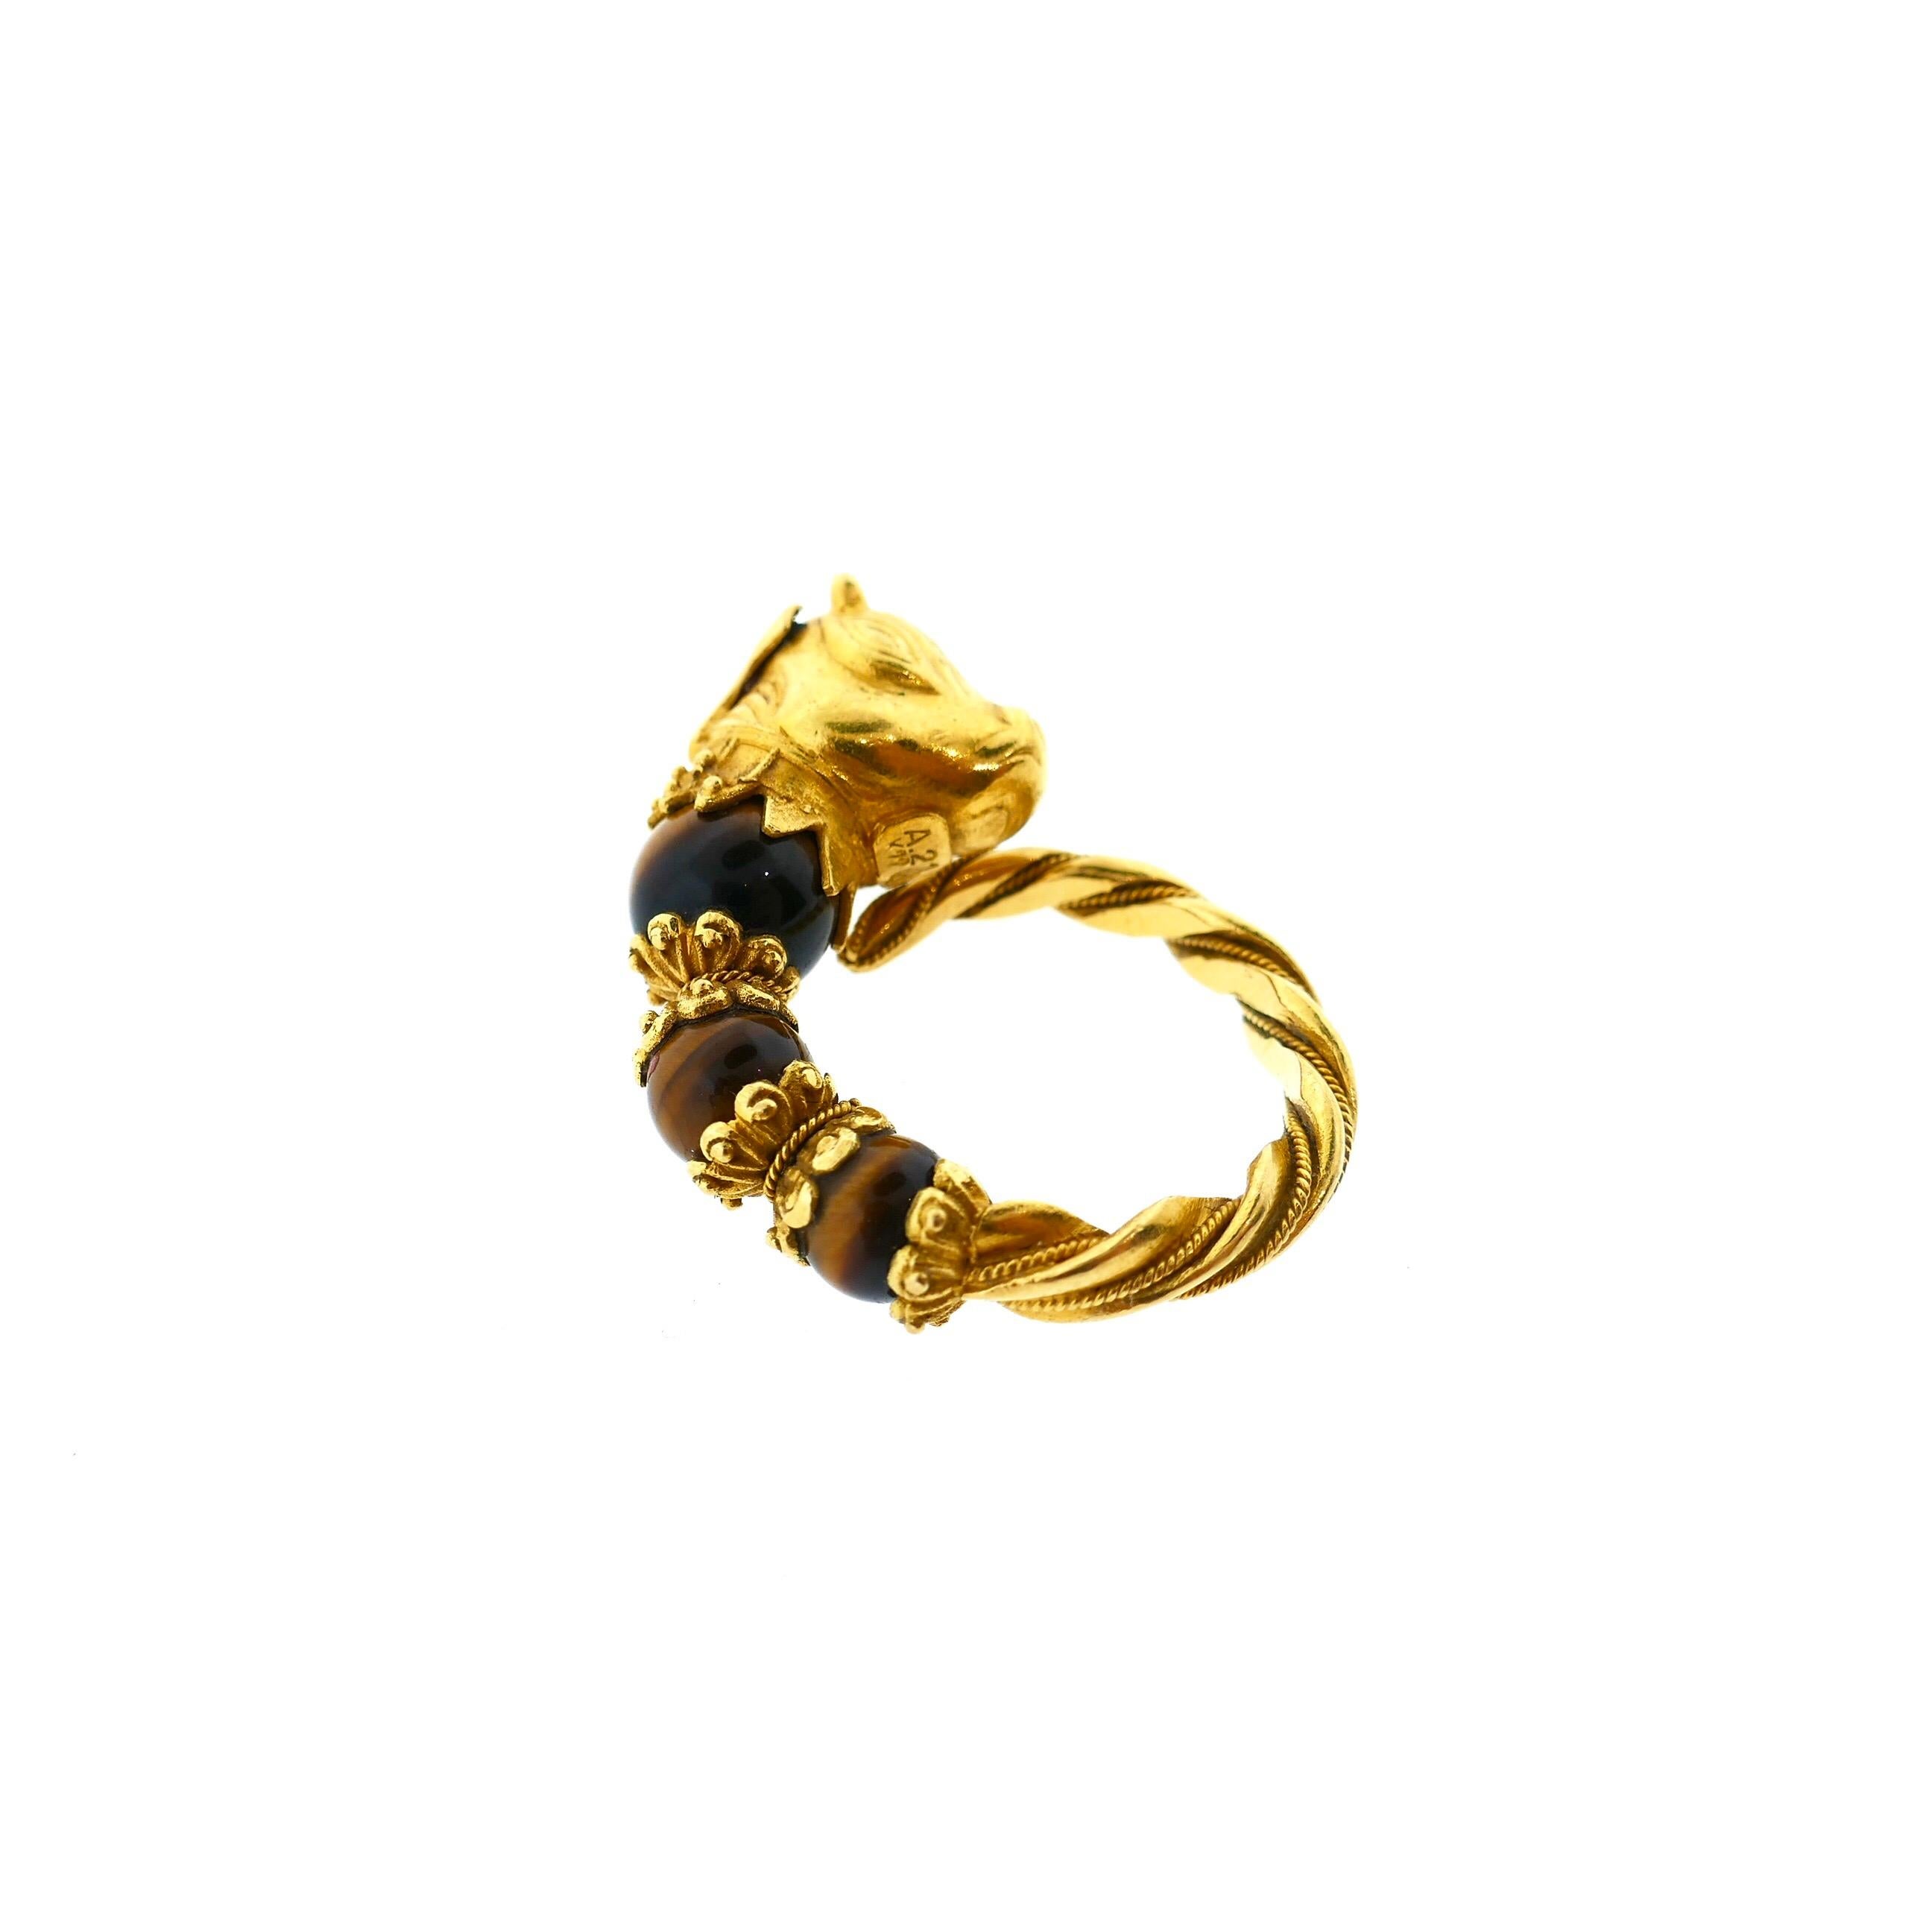 Lalaounis 22 Karat Yellow Gold Tiger Eye Emerald Bull Head Ring

This is a beautiful bull motif ring by the famous Greek jewelry house Lalaounis. It features rich 22 karat yellow gold, tigers eye, and an emerald all in an intricate greek motif. A